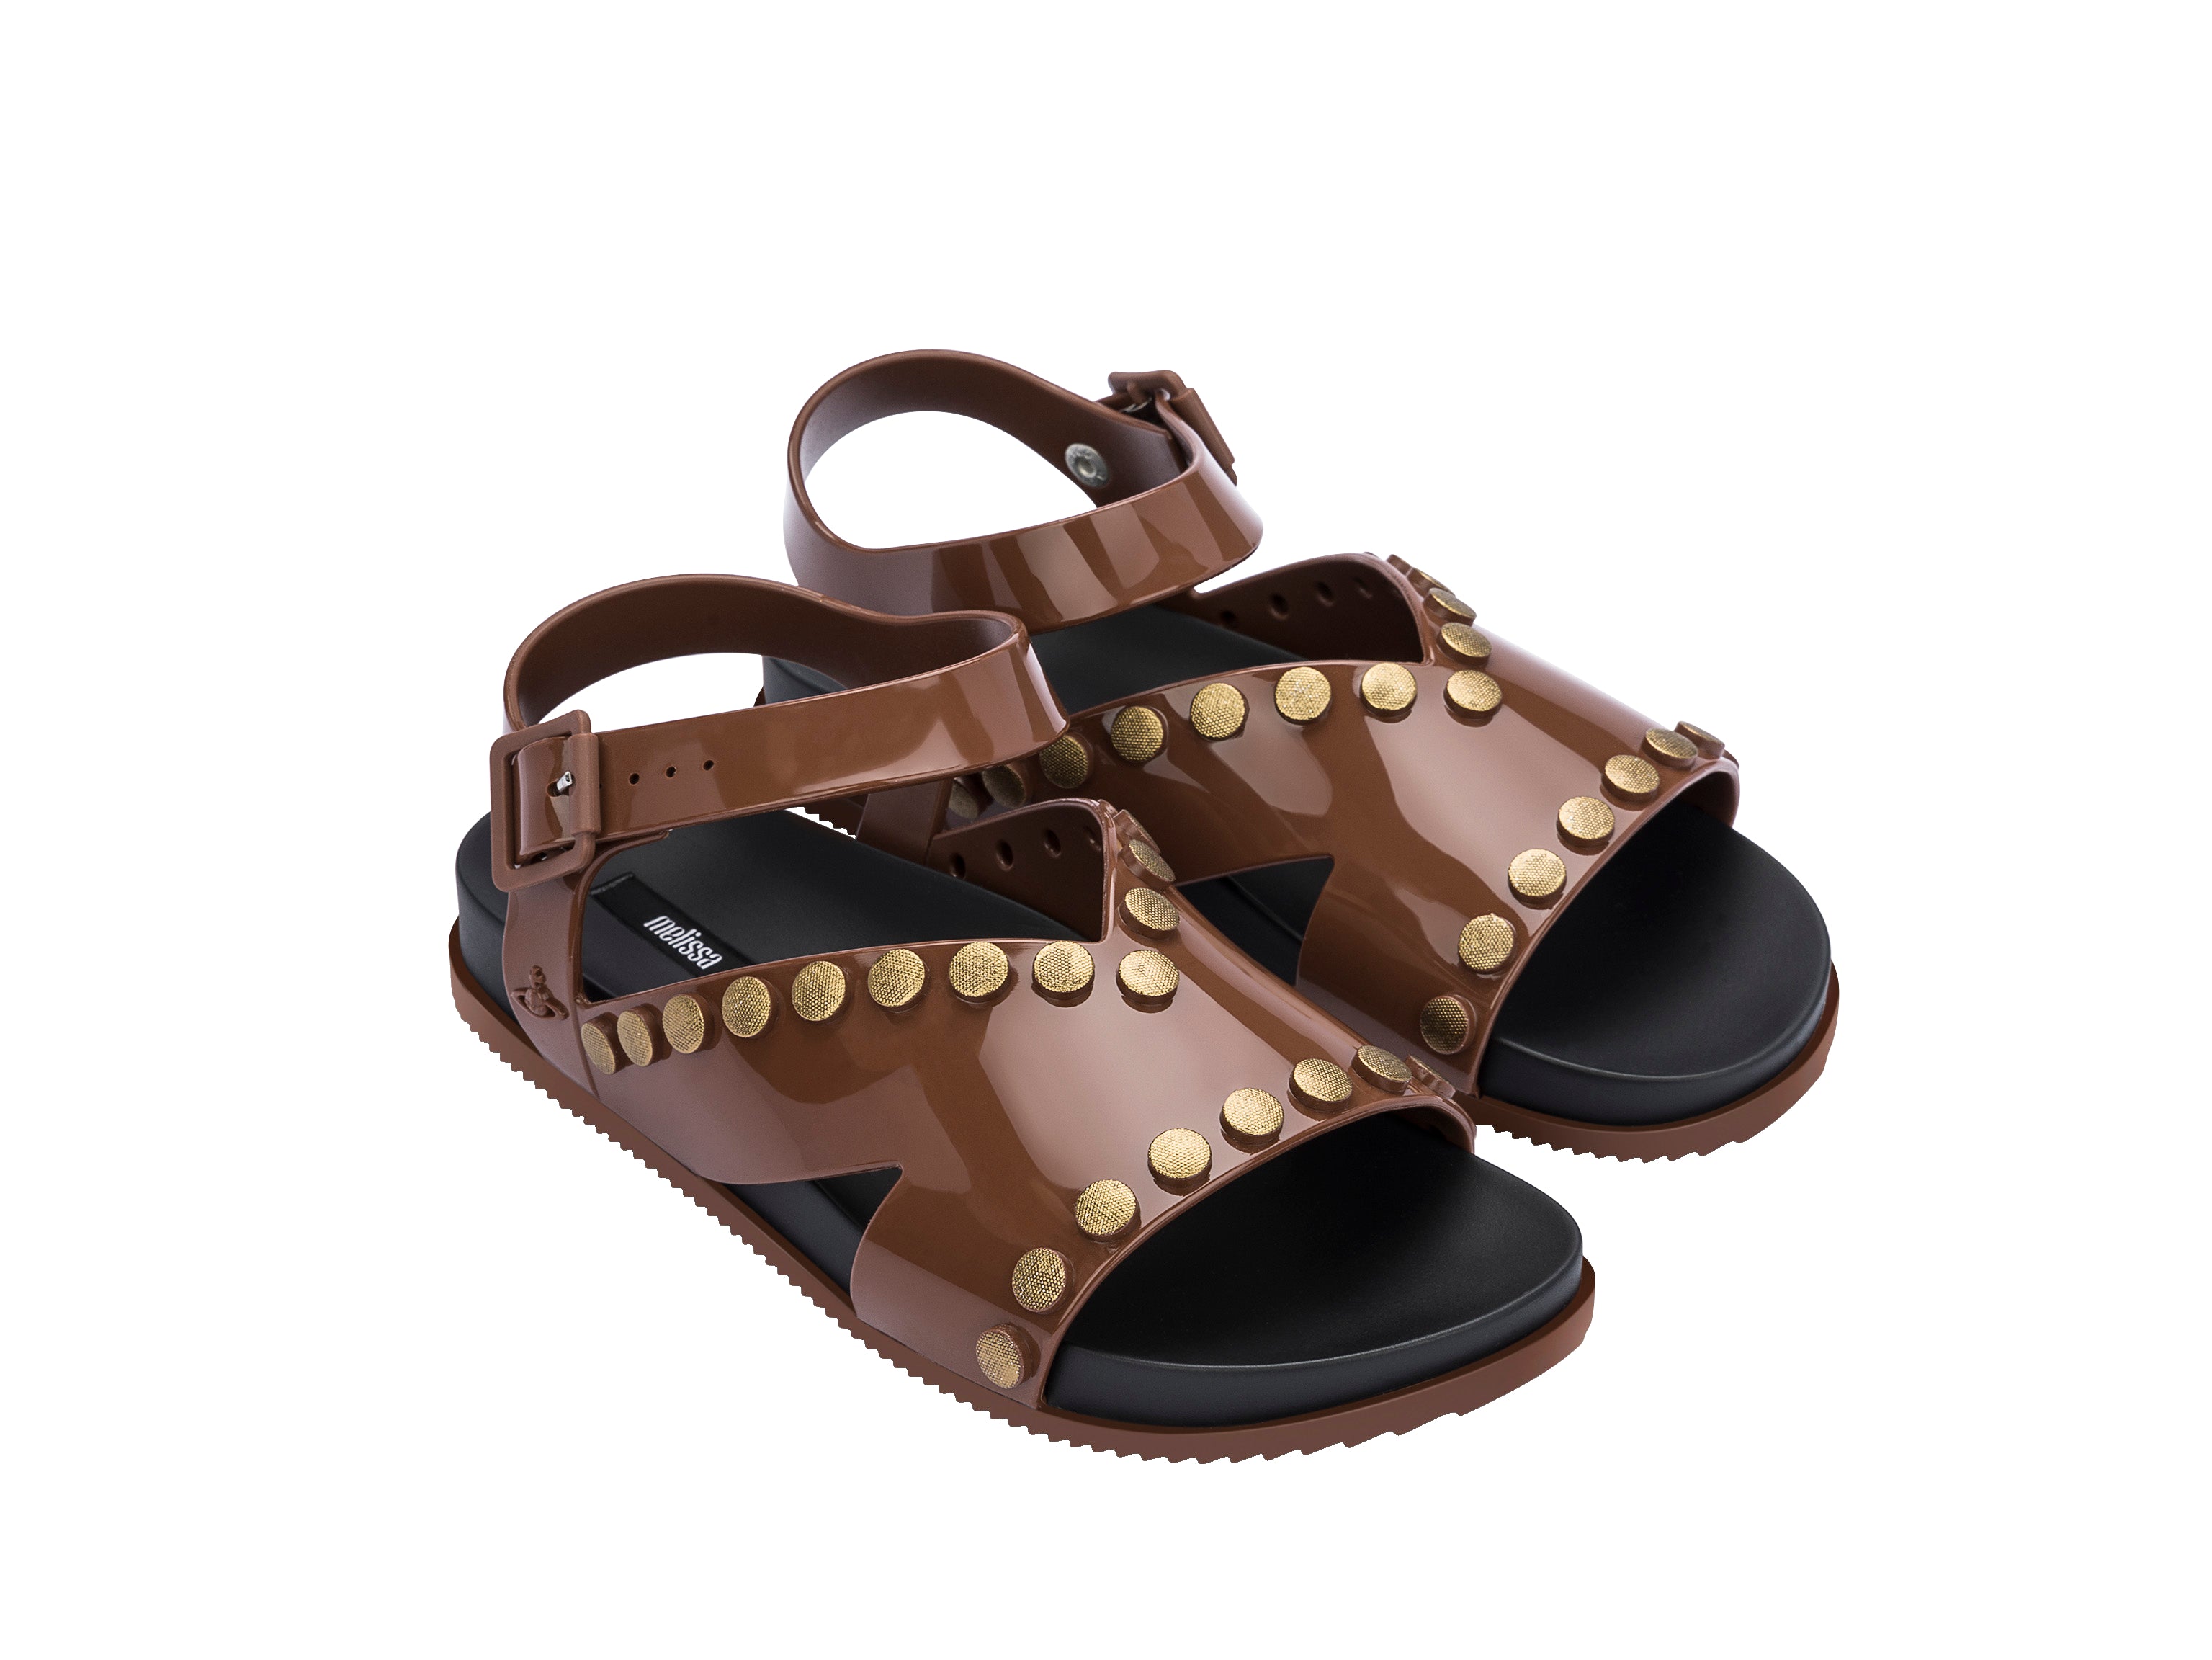 Vivienne Westwood Anglomania X Melissa Ciao Sandal - Brown